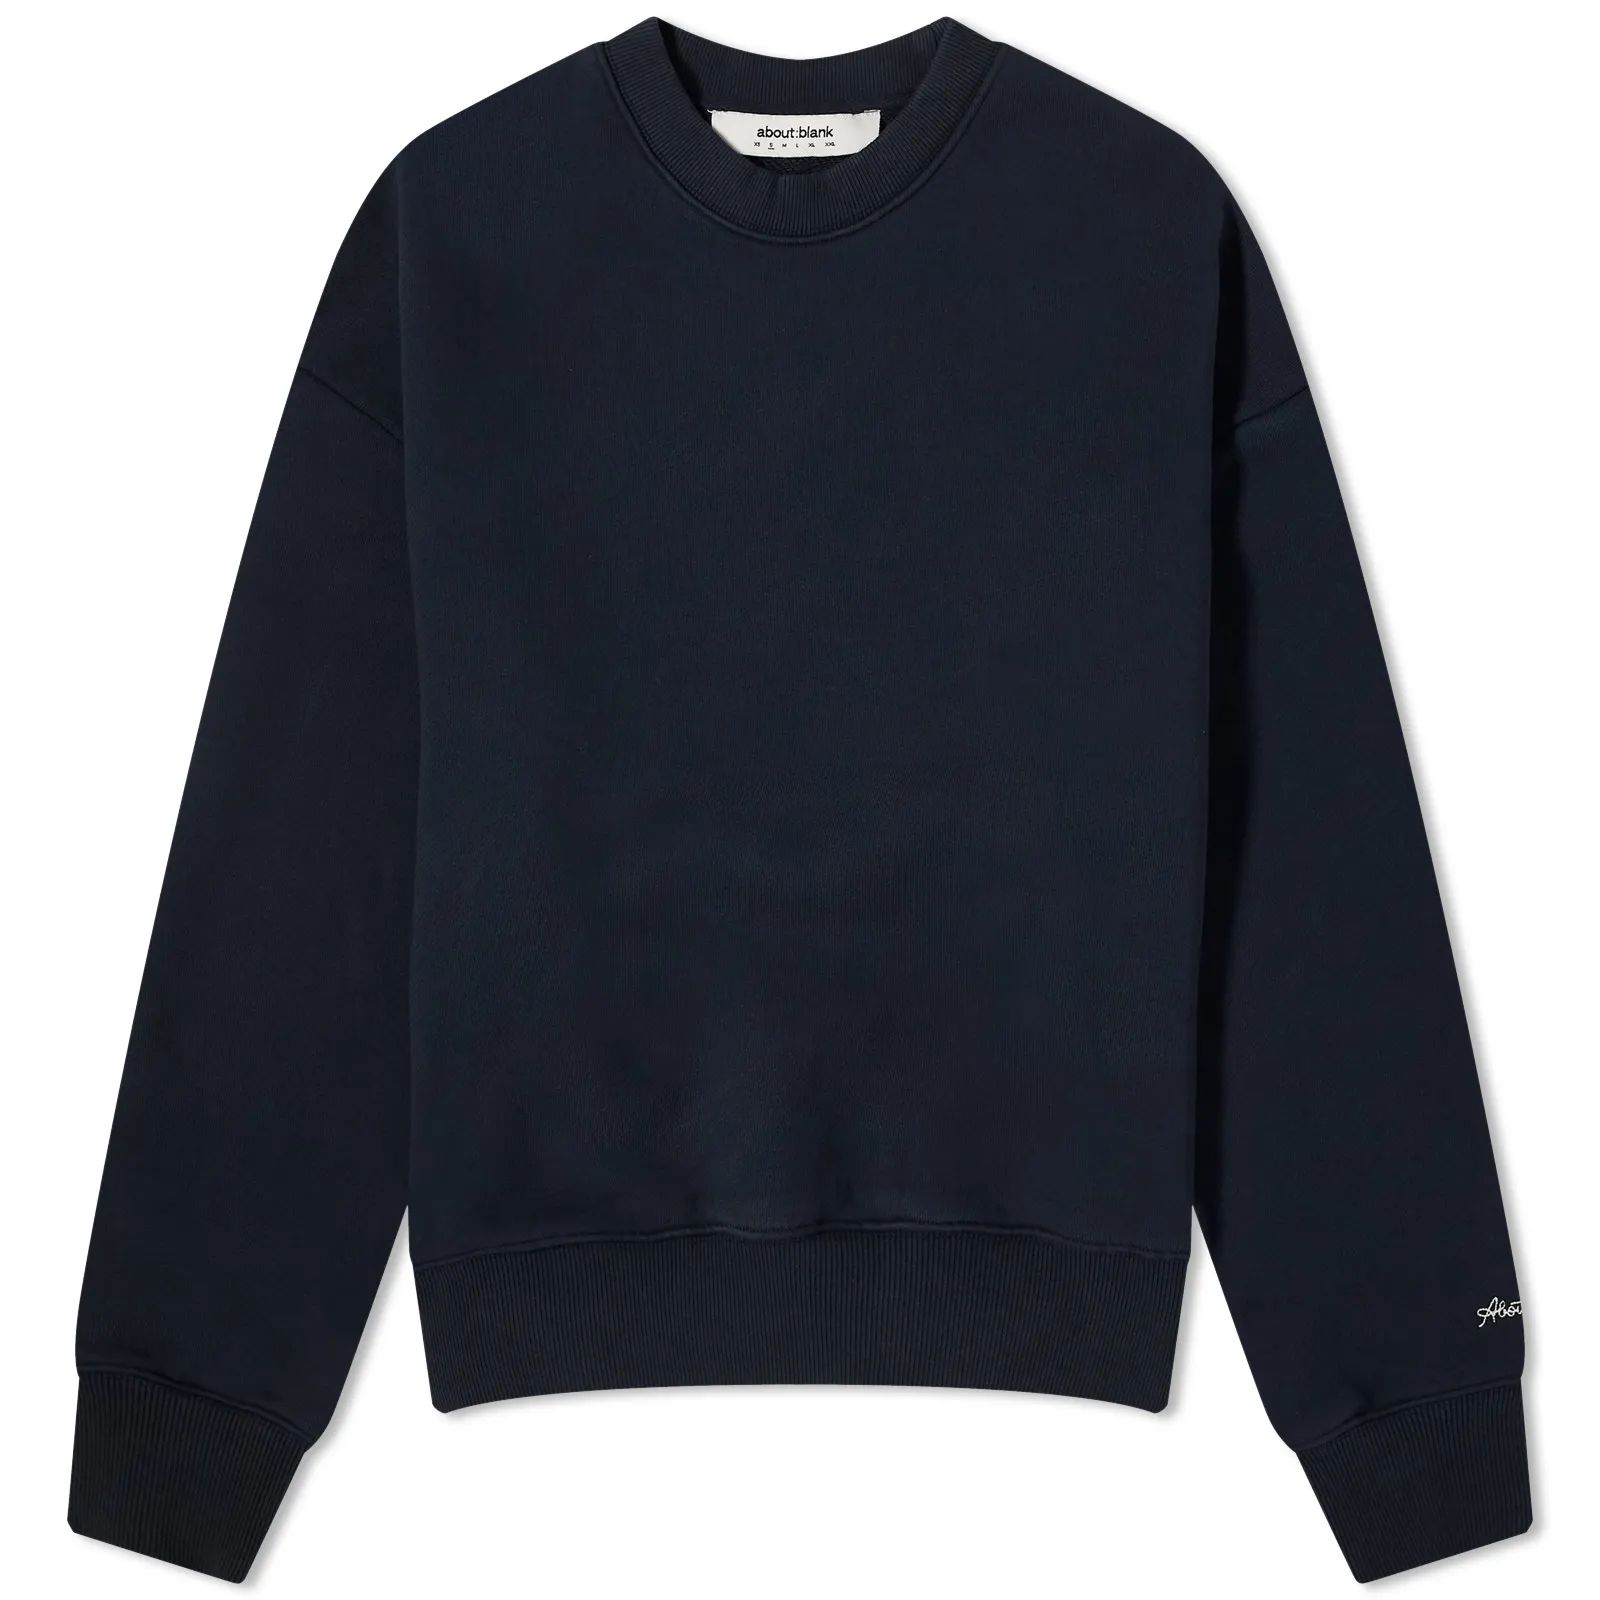 about:blank Chain Stitch Crew Sweat French Navy & Ecru | END. | End Clothing (UK & IE)